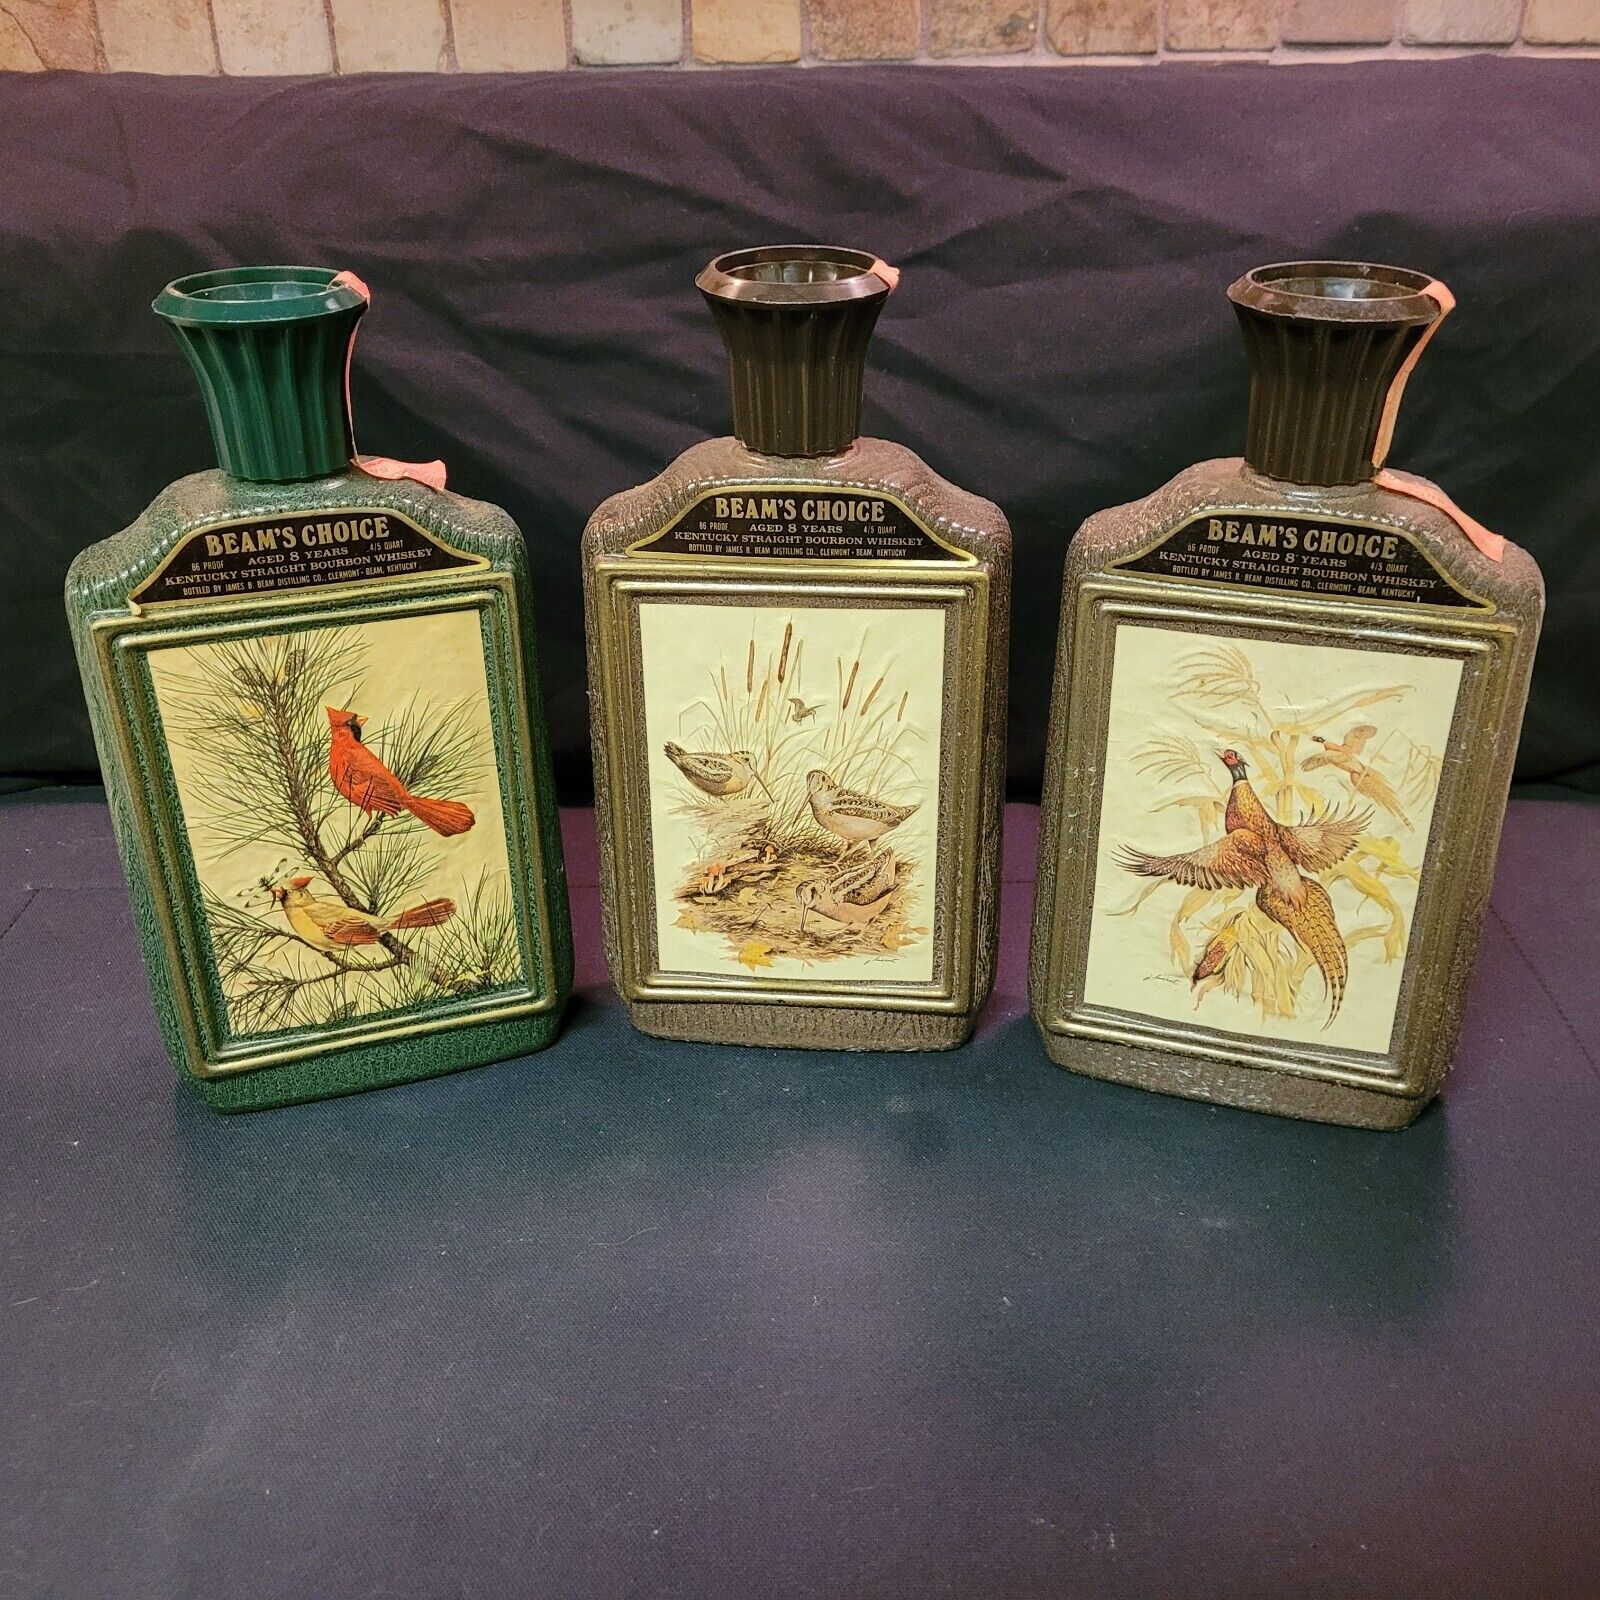 Vintage Jim Beam Whiskey Decanter Bottles - Select from 5 Different Sets